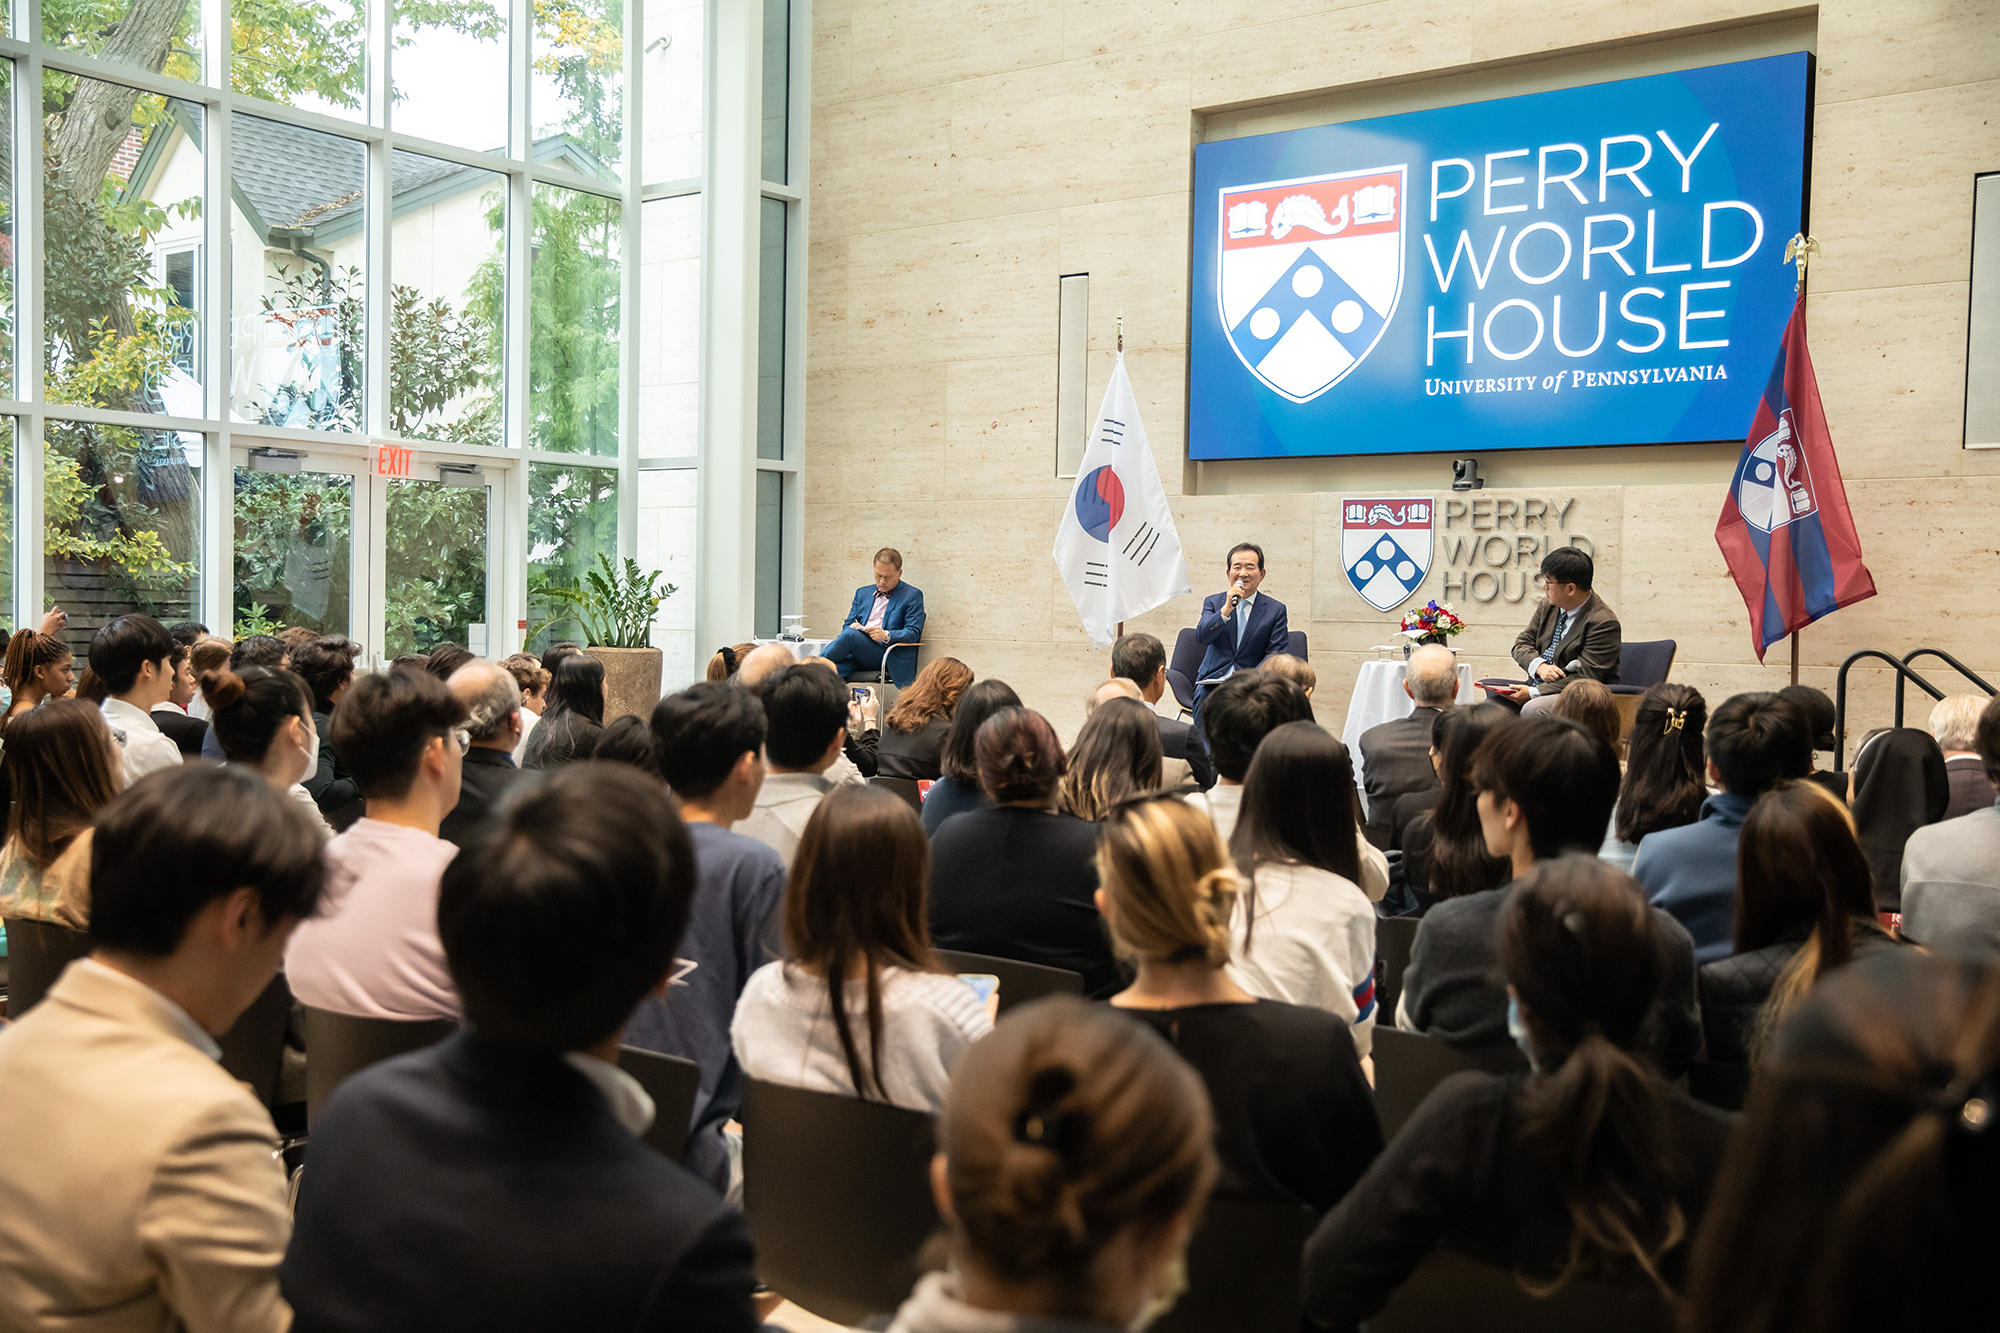 Chung Sye-kyun speaks to a seated audience at the Perry World House.